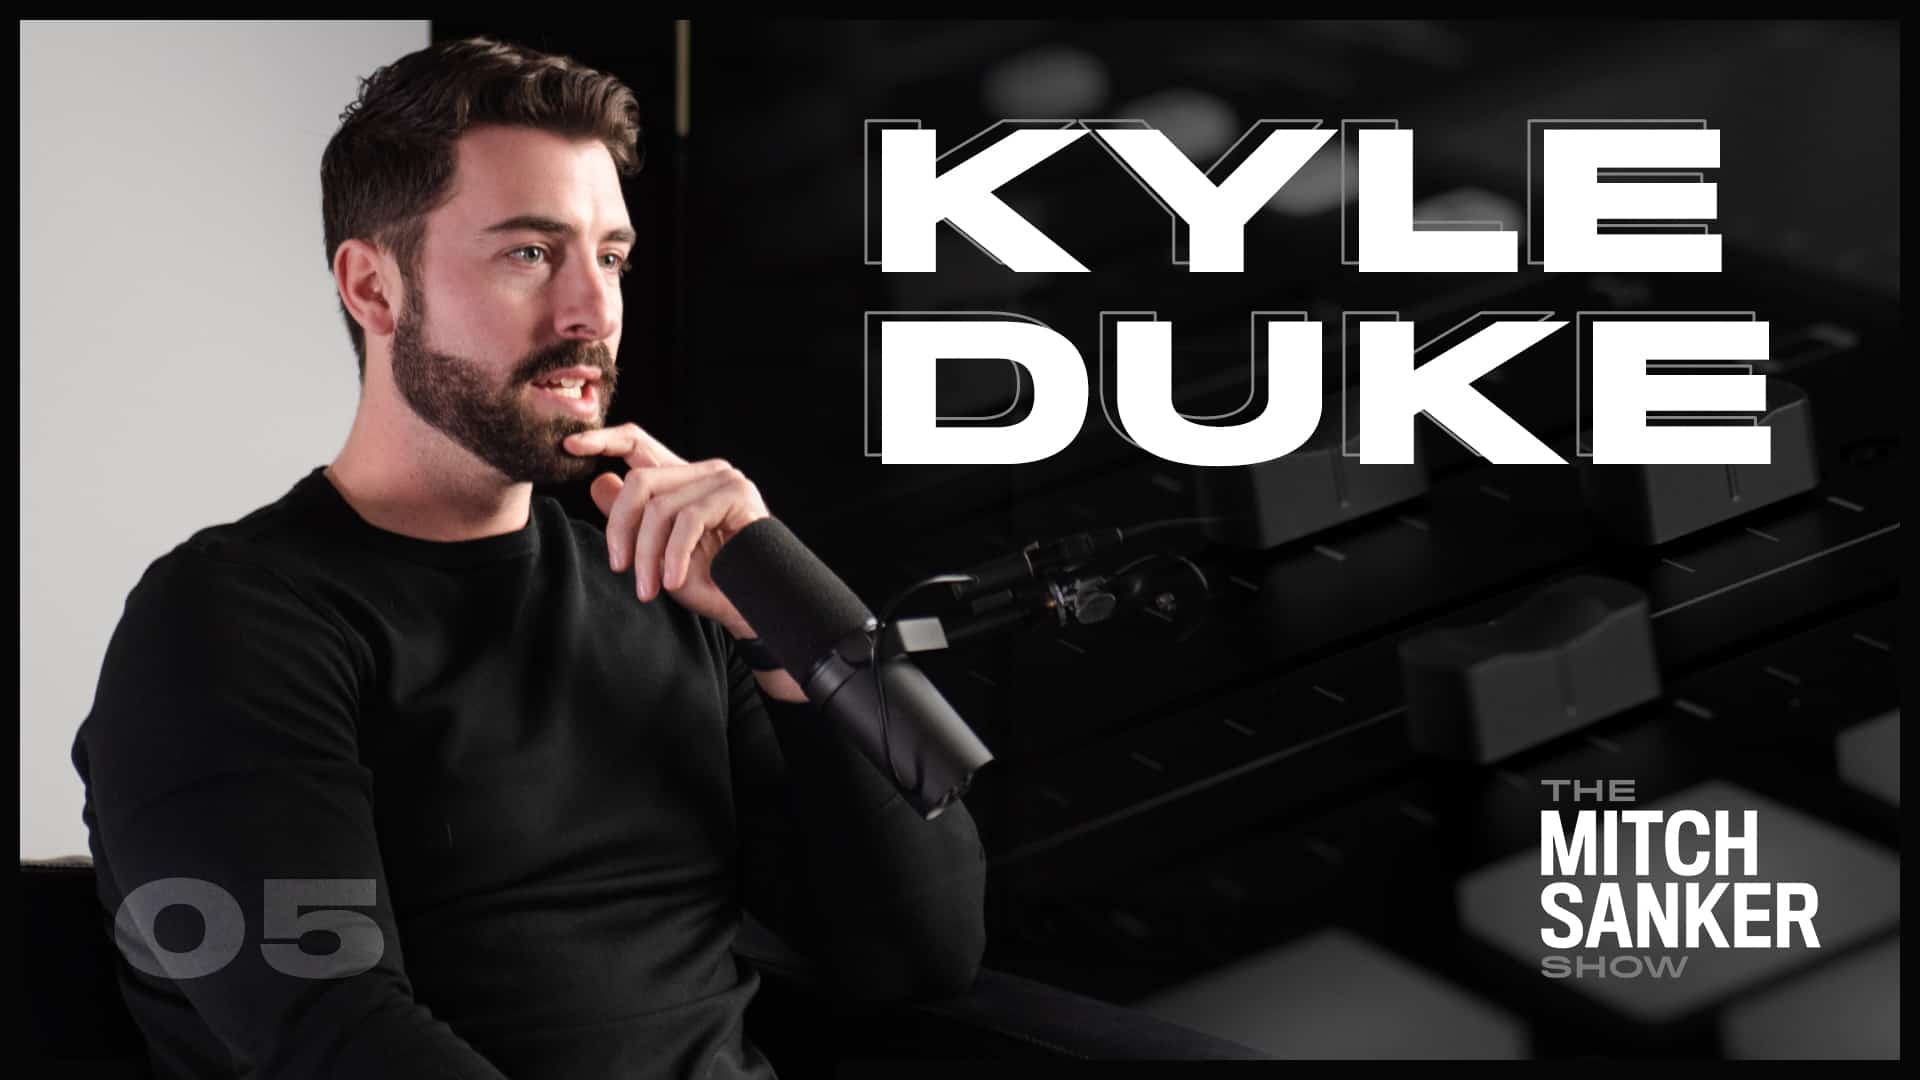 You are currently viewing The Mitch Sanker Show – Episode 05 featuring Kyle Duke